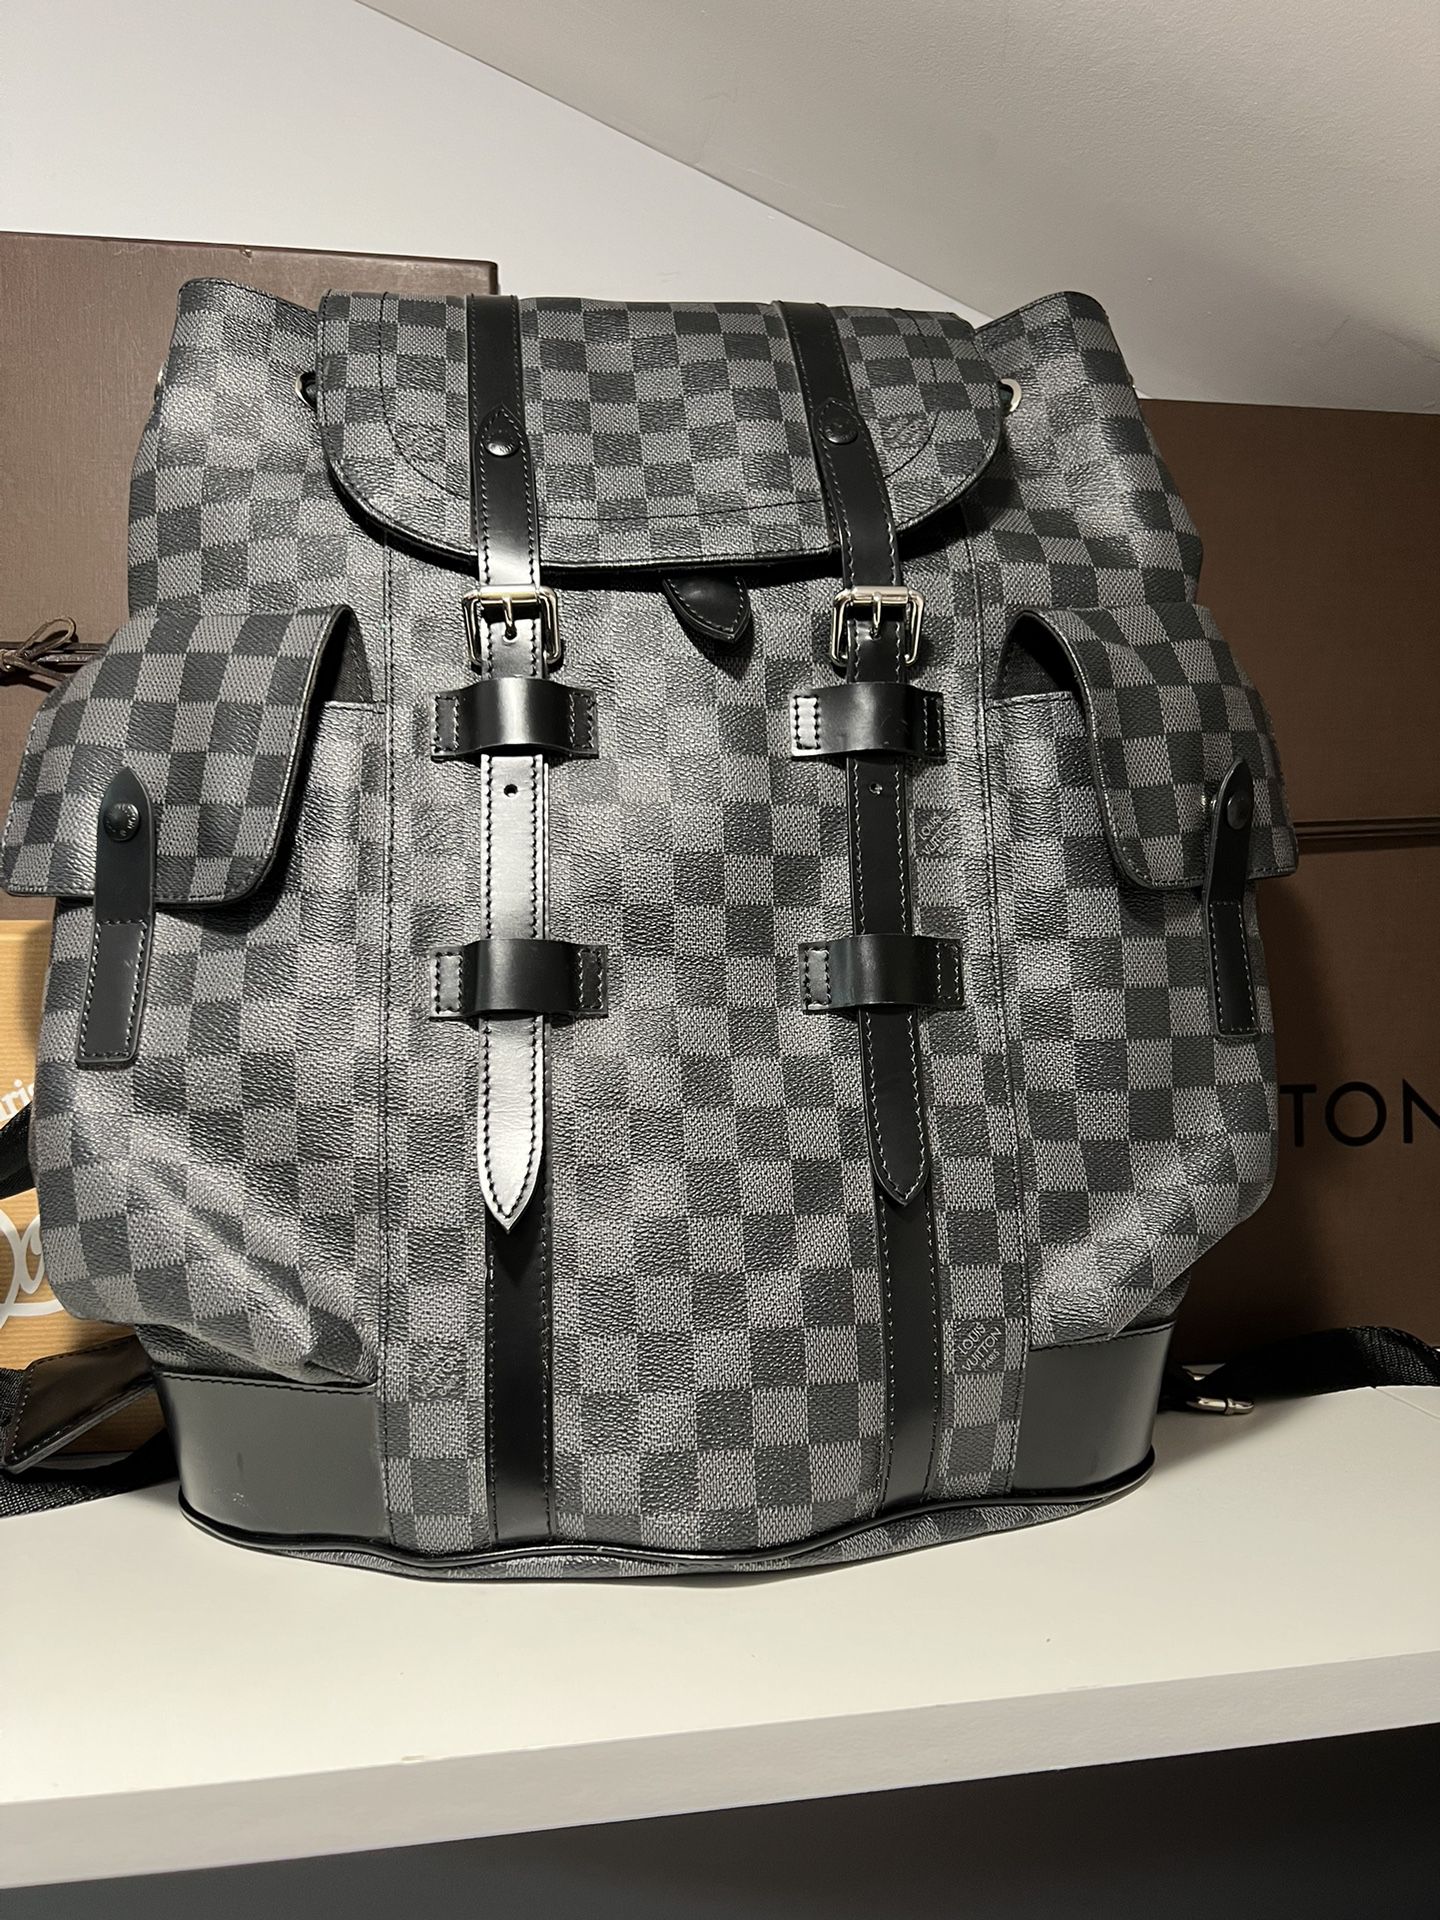 Louis Vuitton pre-owned Christopher PM backpack - Grey